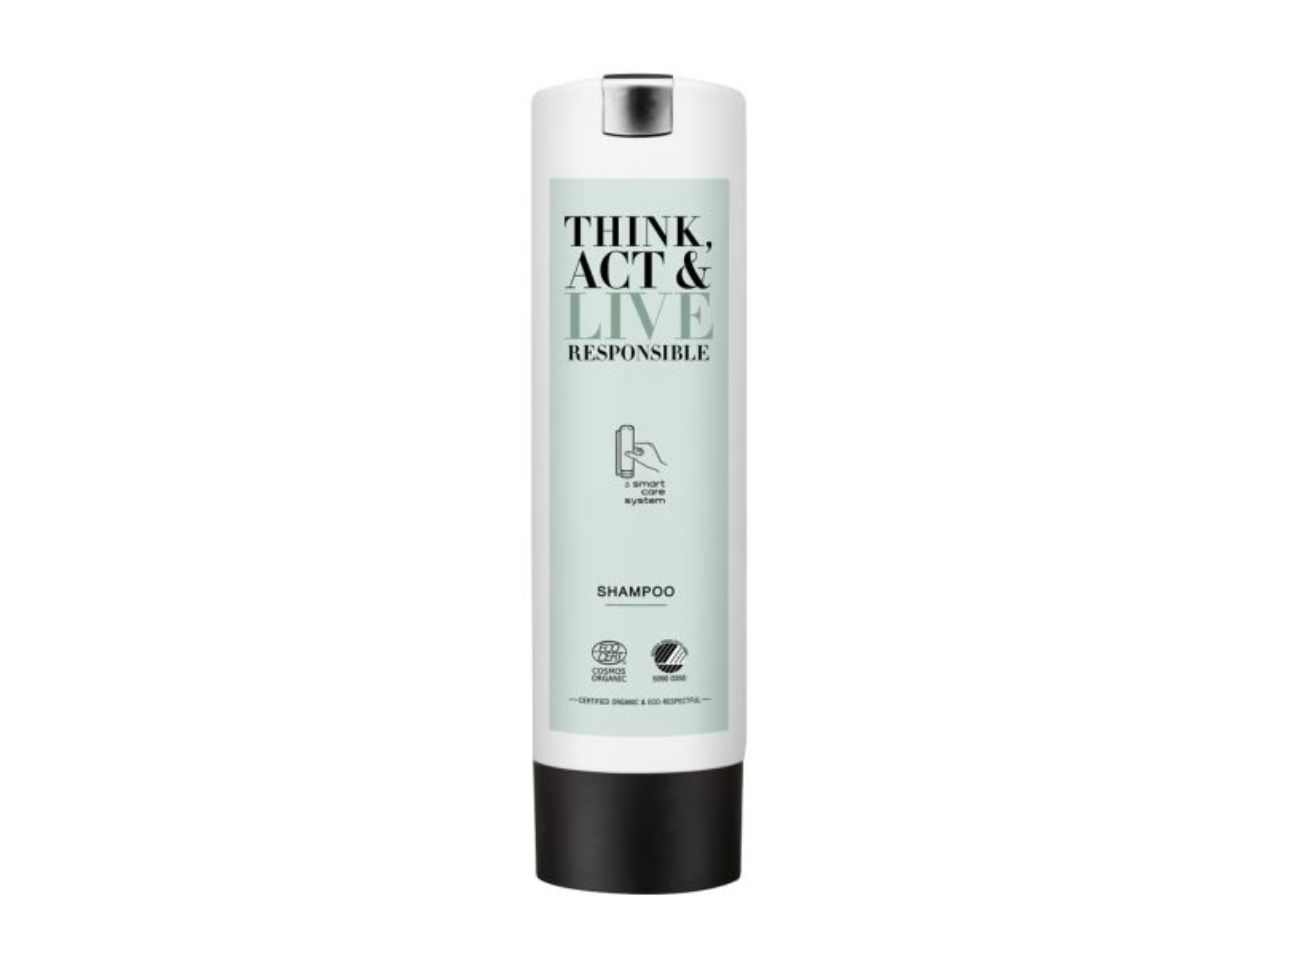 Think Act & Live Responsible - Shampoo, Smart Care, 300ml